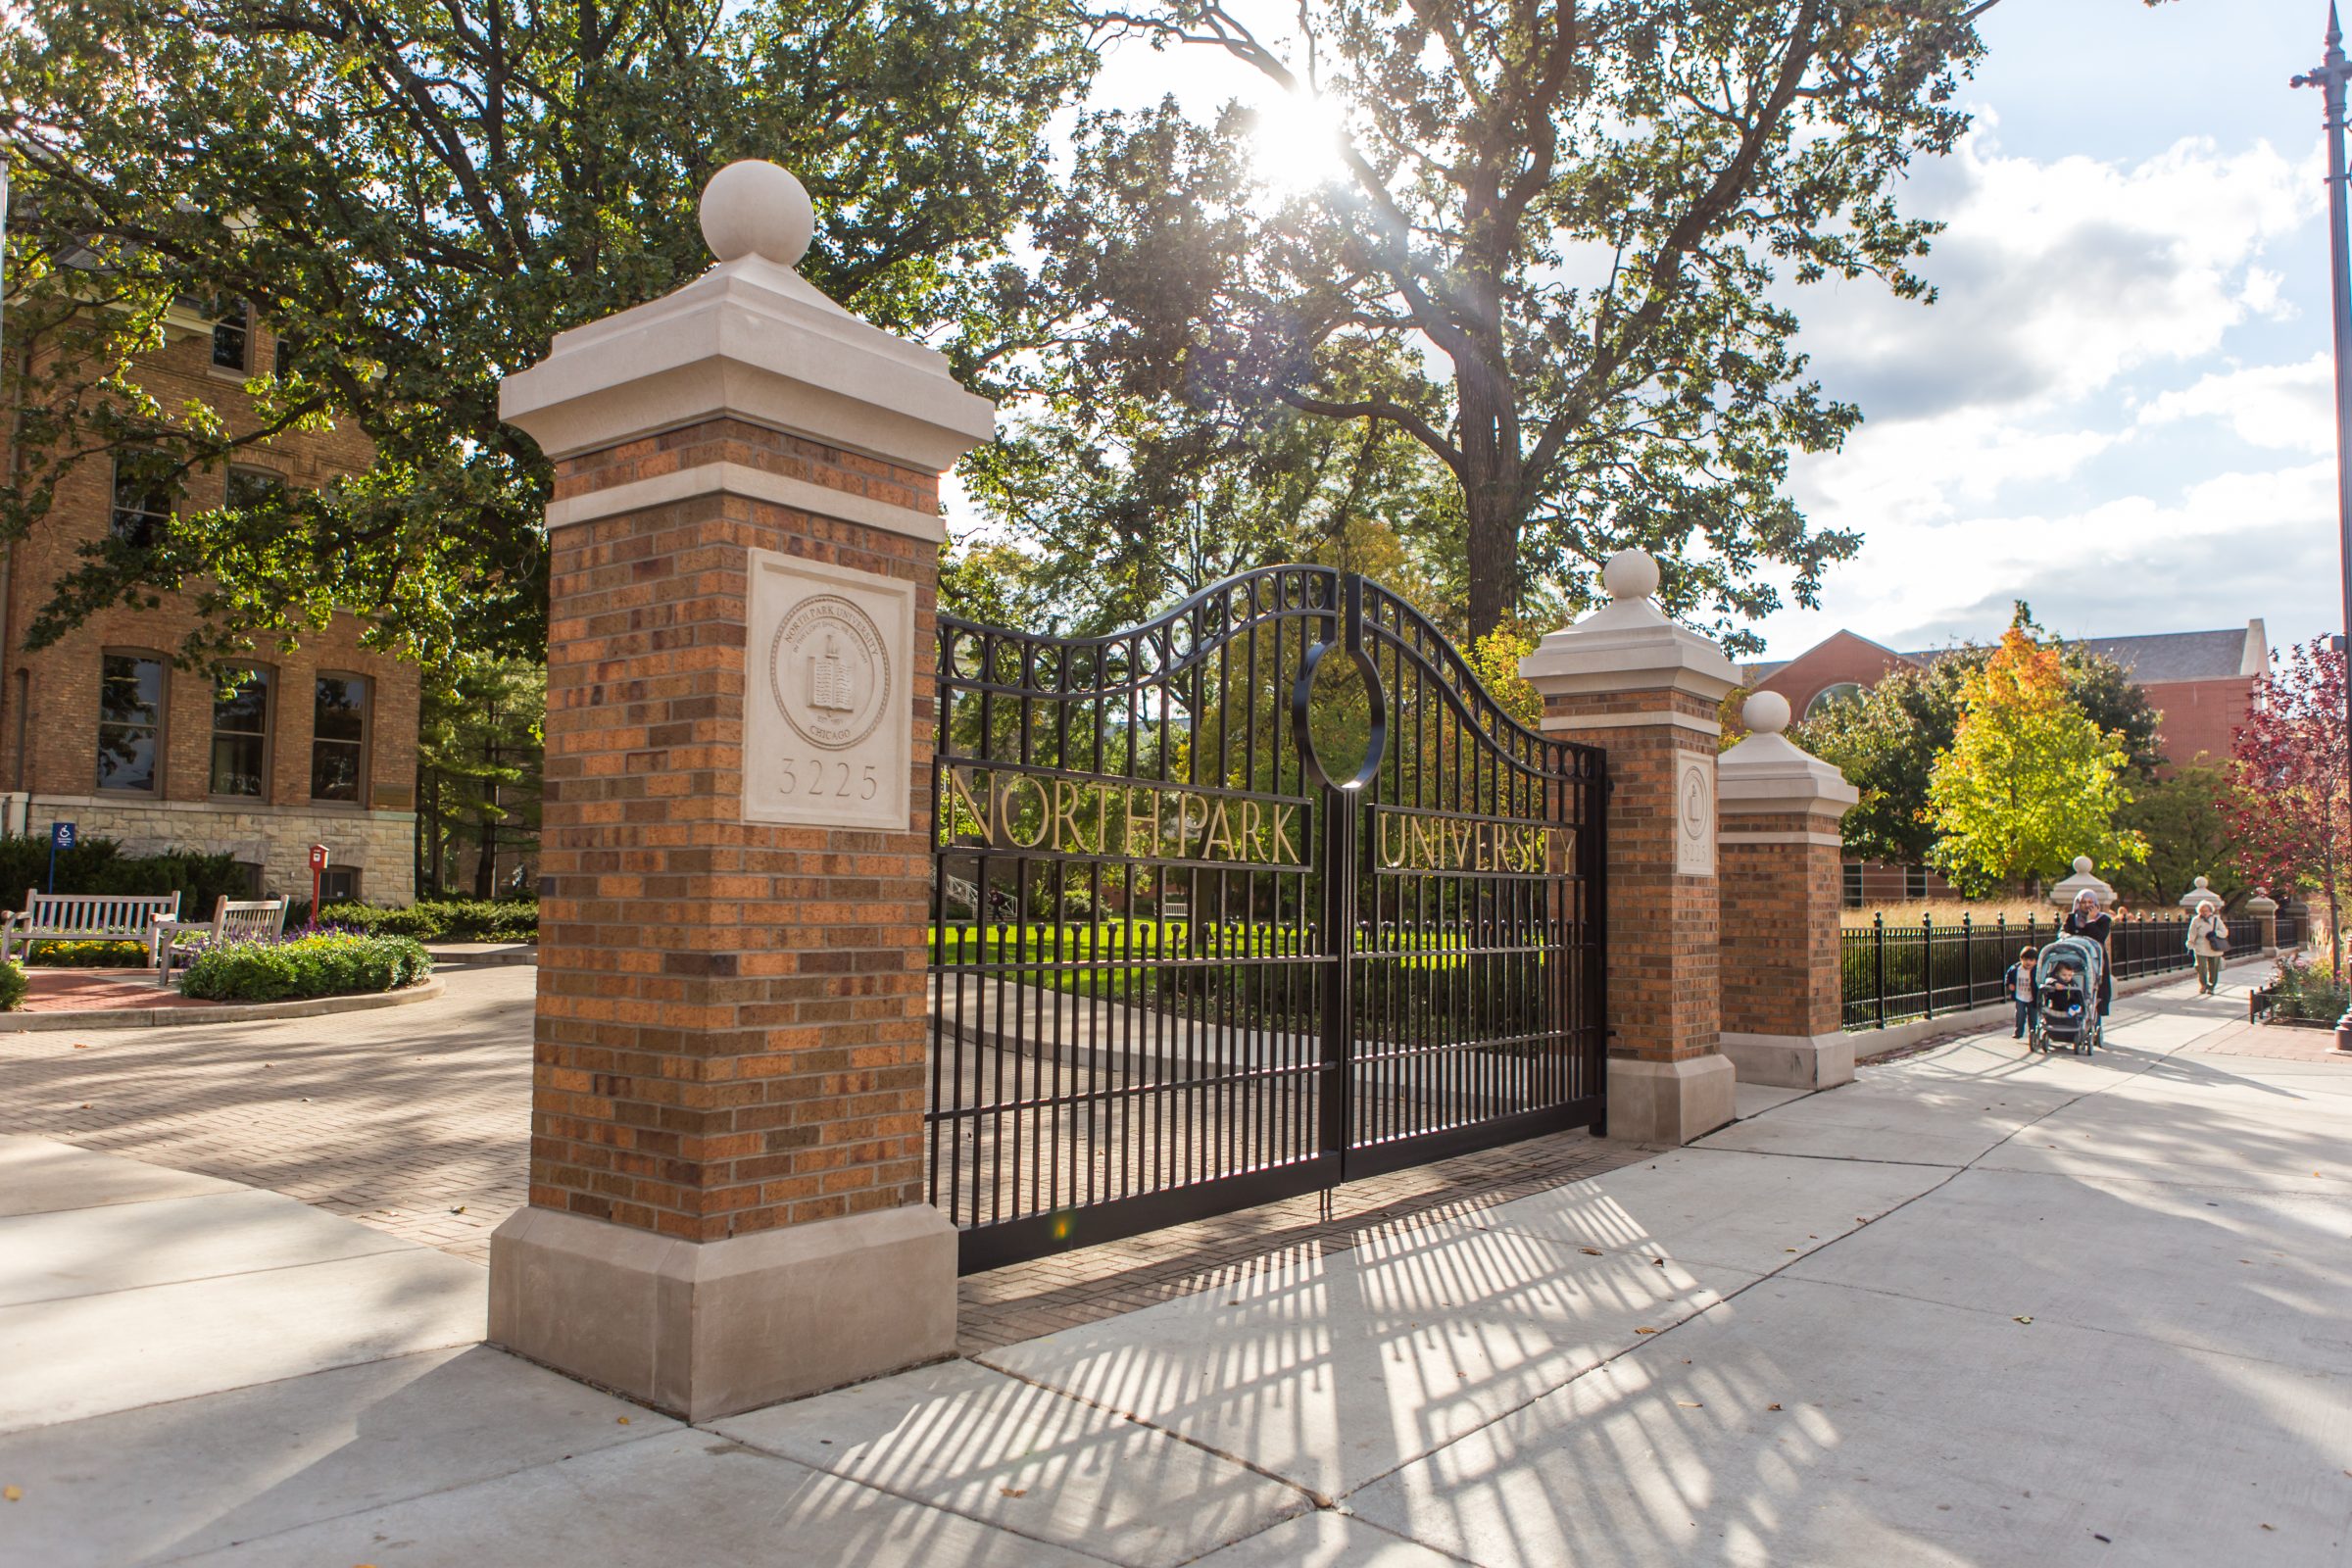 Nursing and Health Sciences at North Park, brick building and gate at the front of campus.